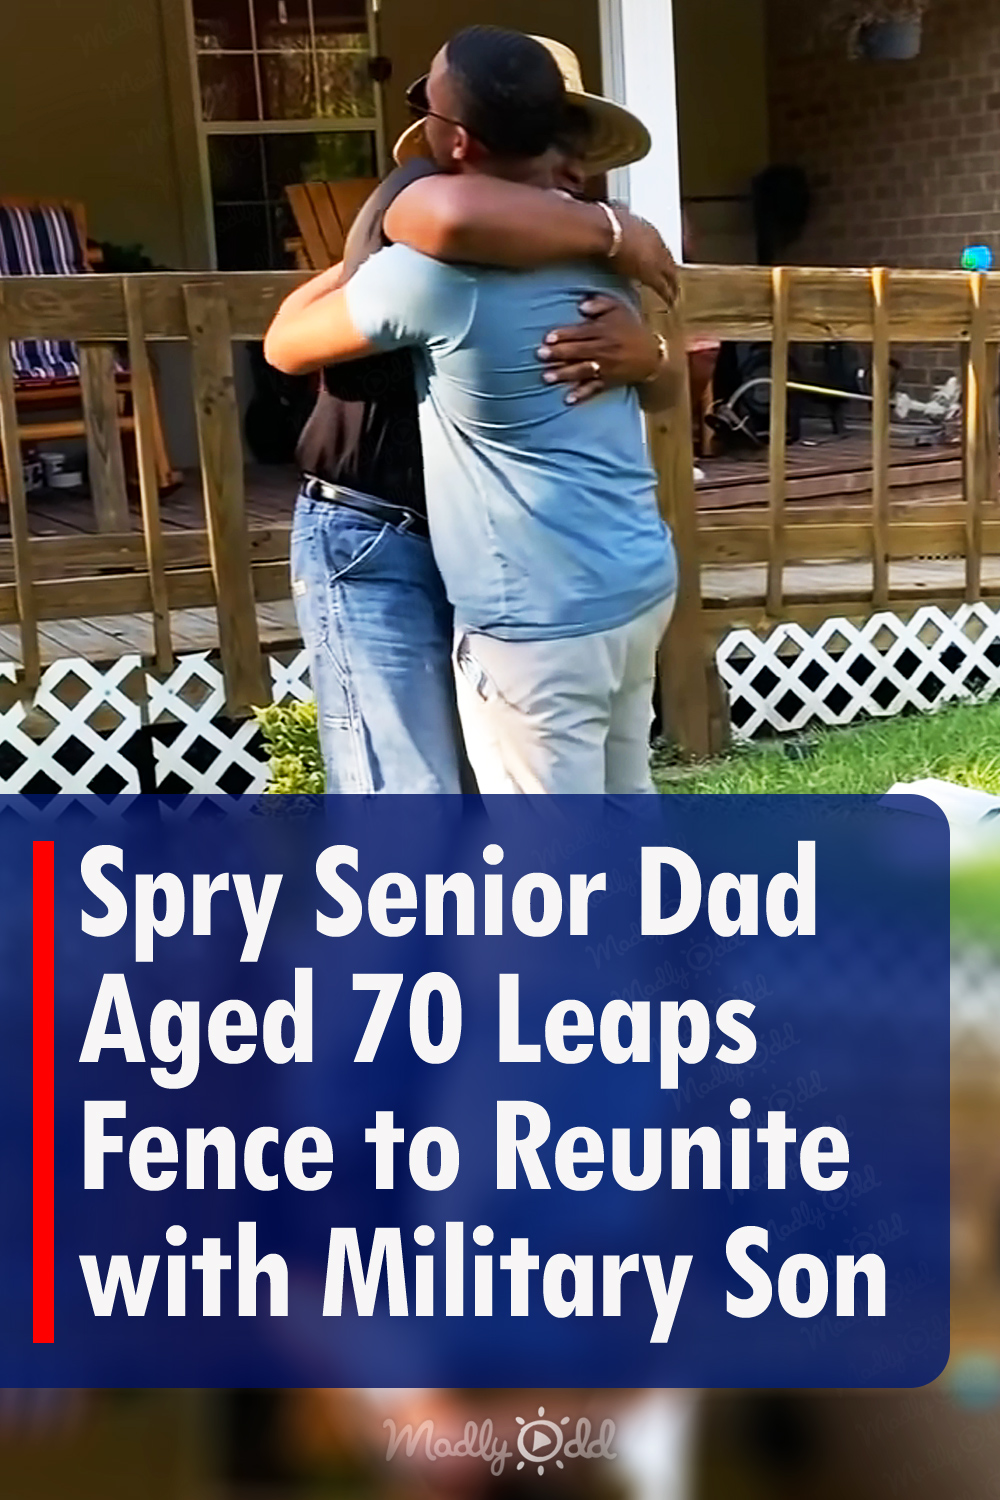 Spry Senior Dad Aged 70 Leaps Fence to Reunite with Military Son